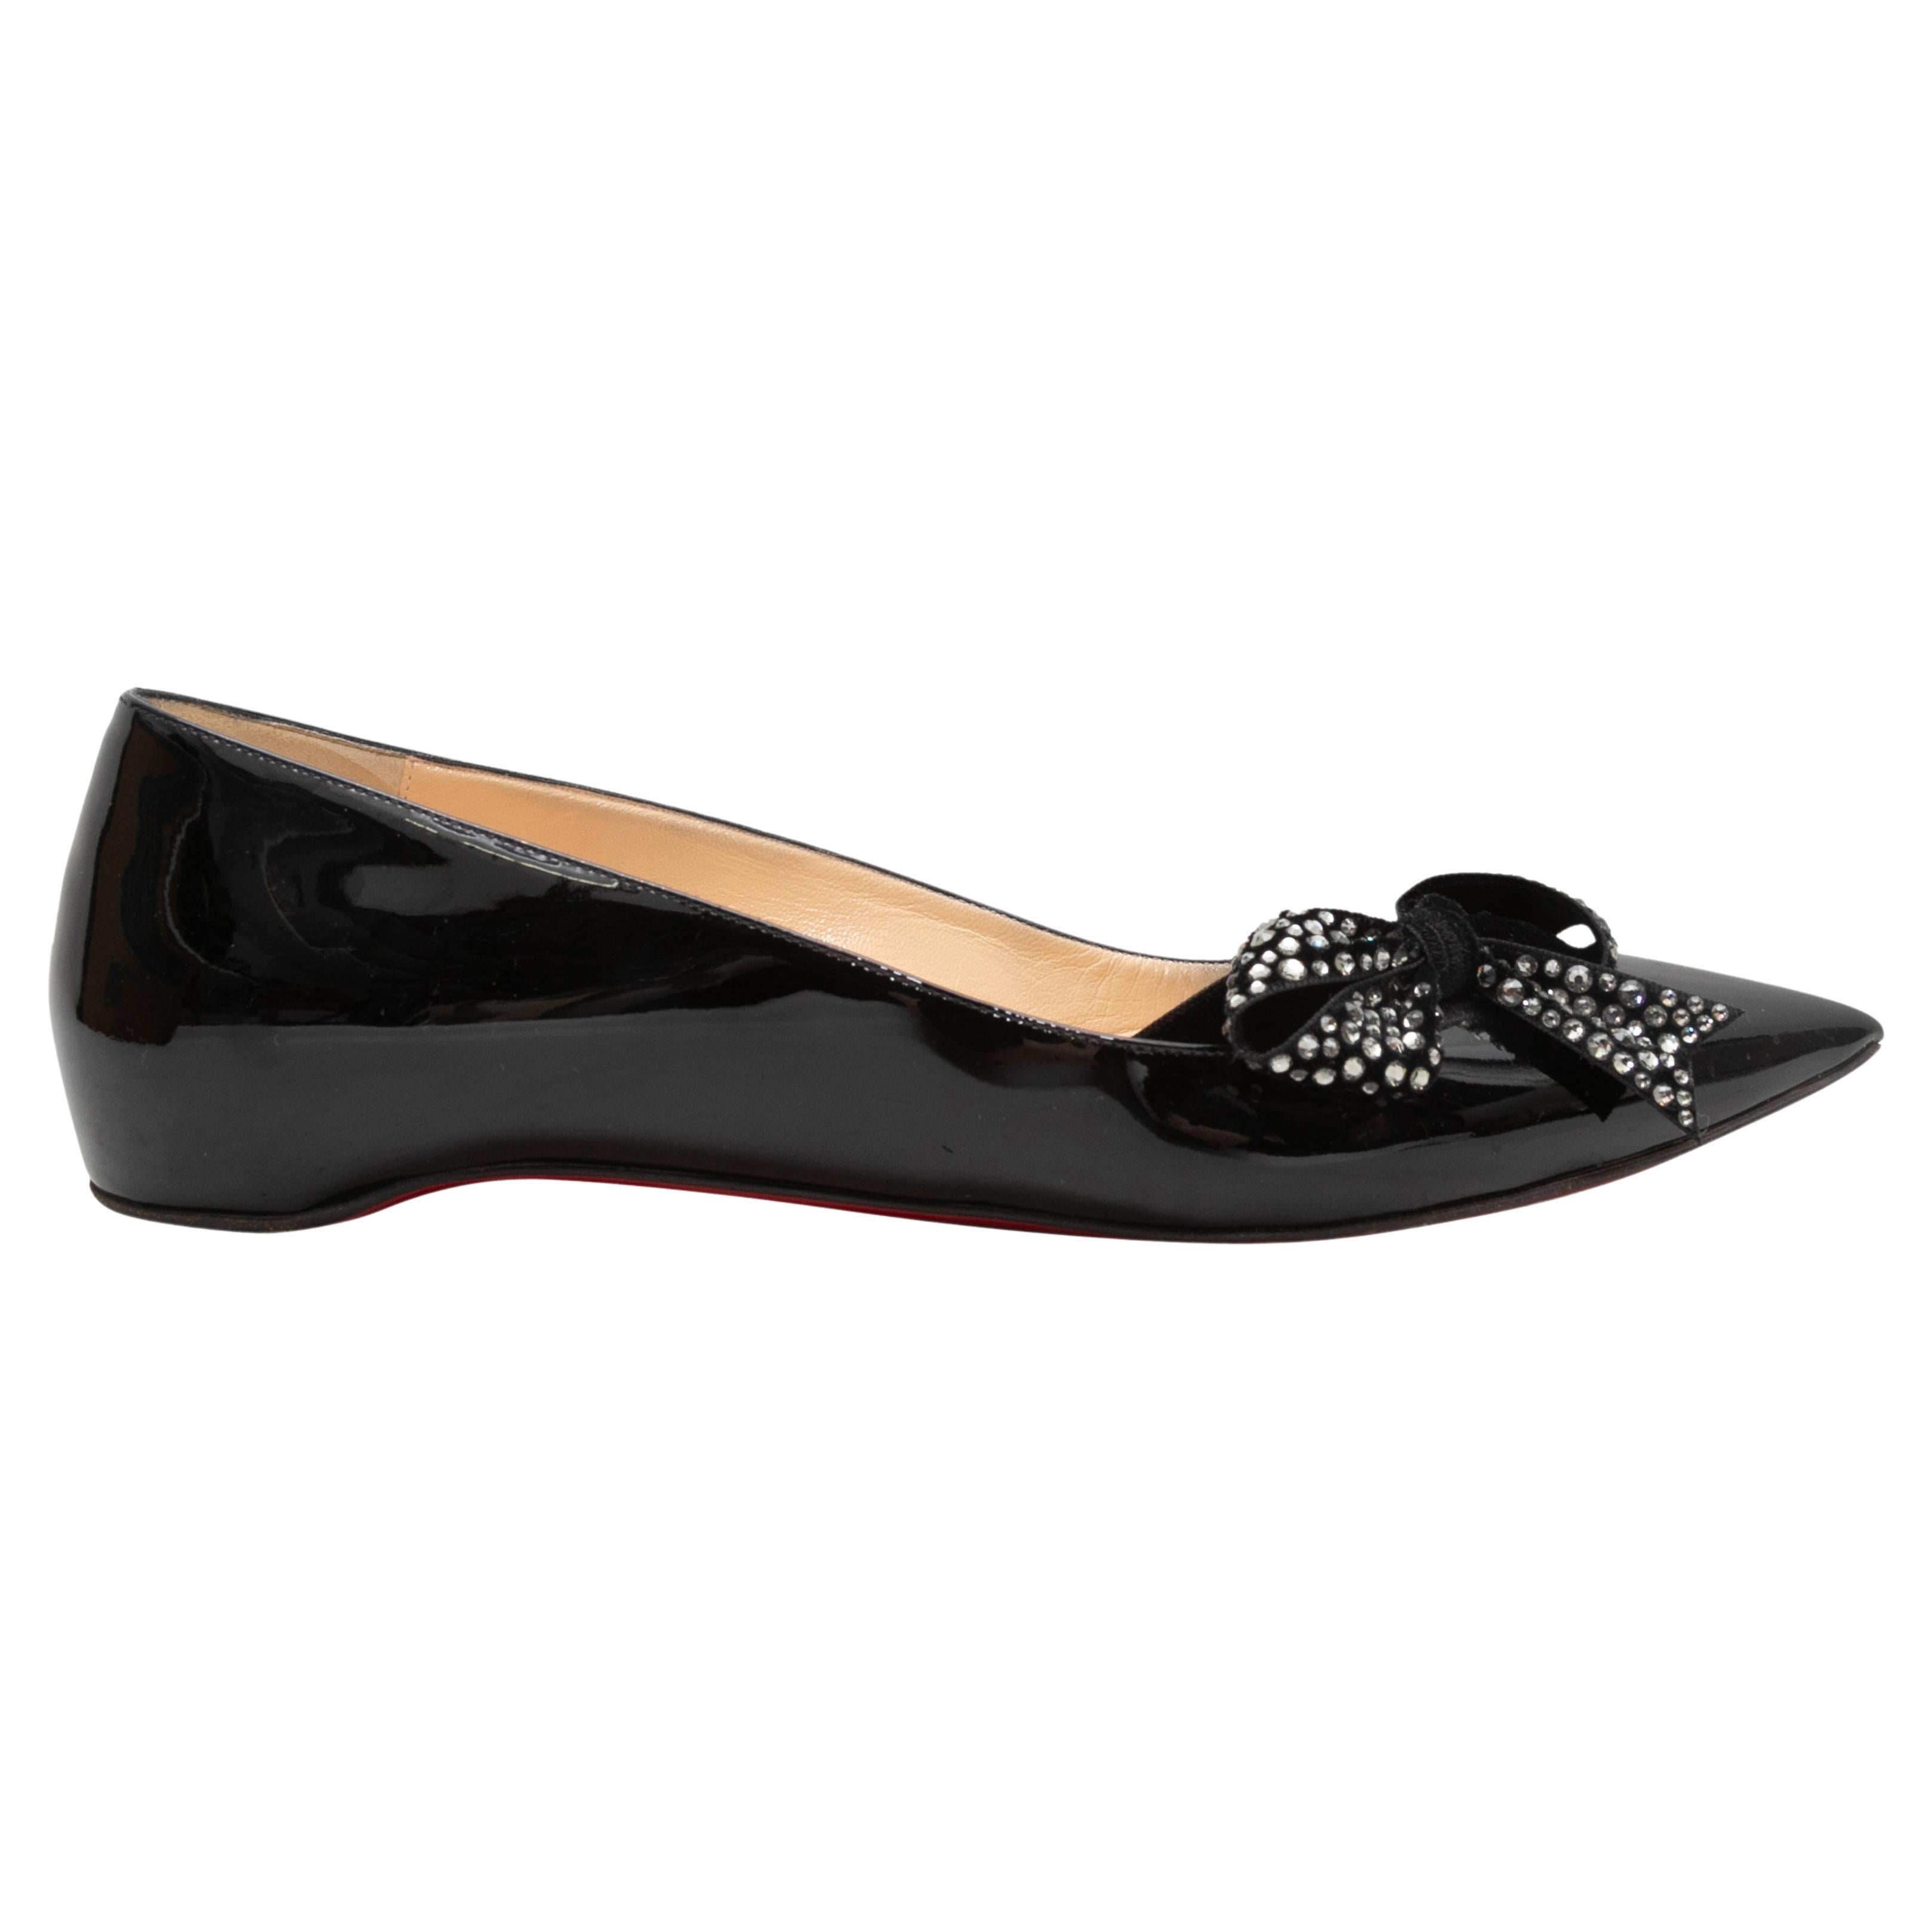 Black Christian Louboutin Patent Crystal Bow-Accented Flats Size 39.5 For Sale